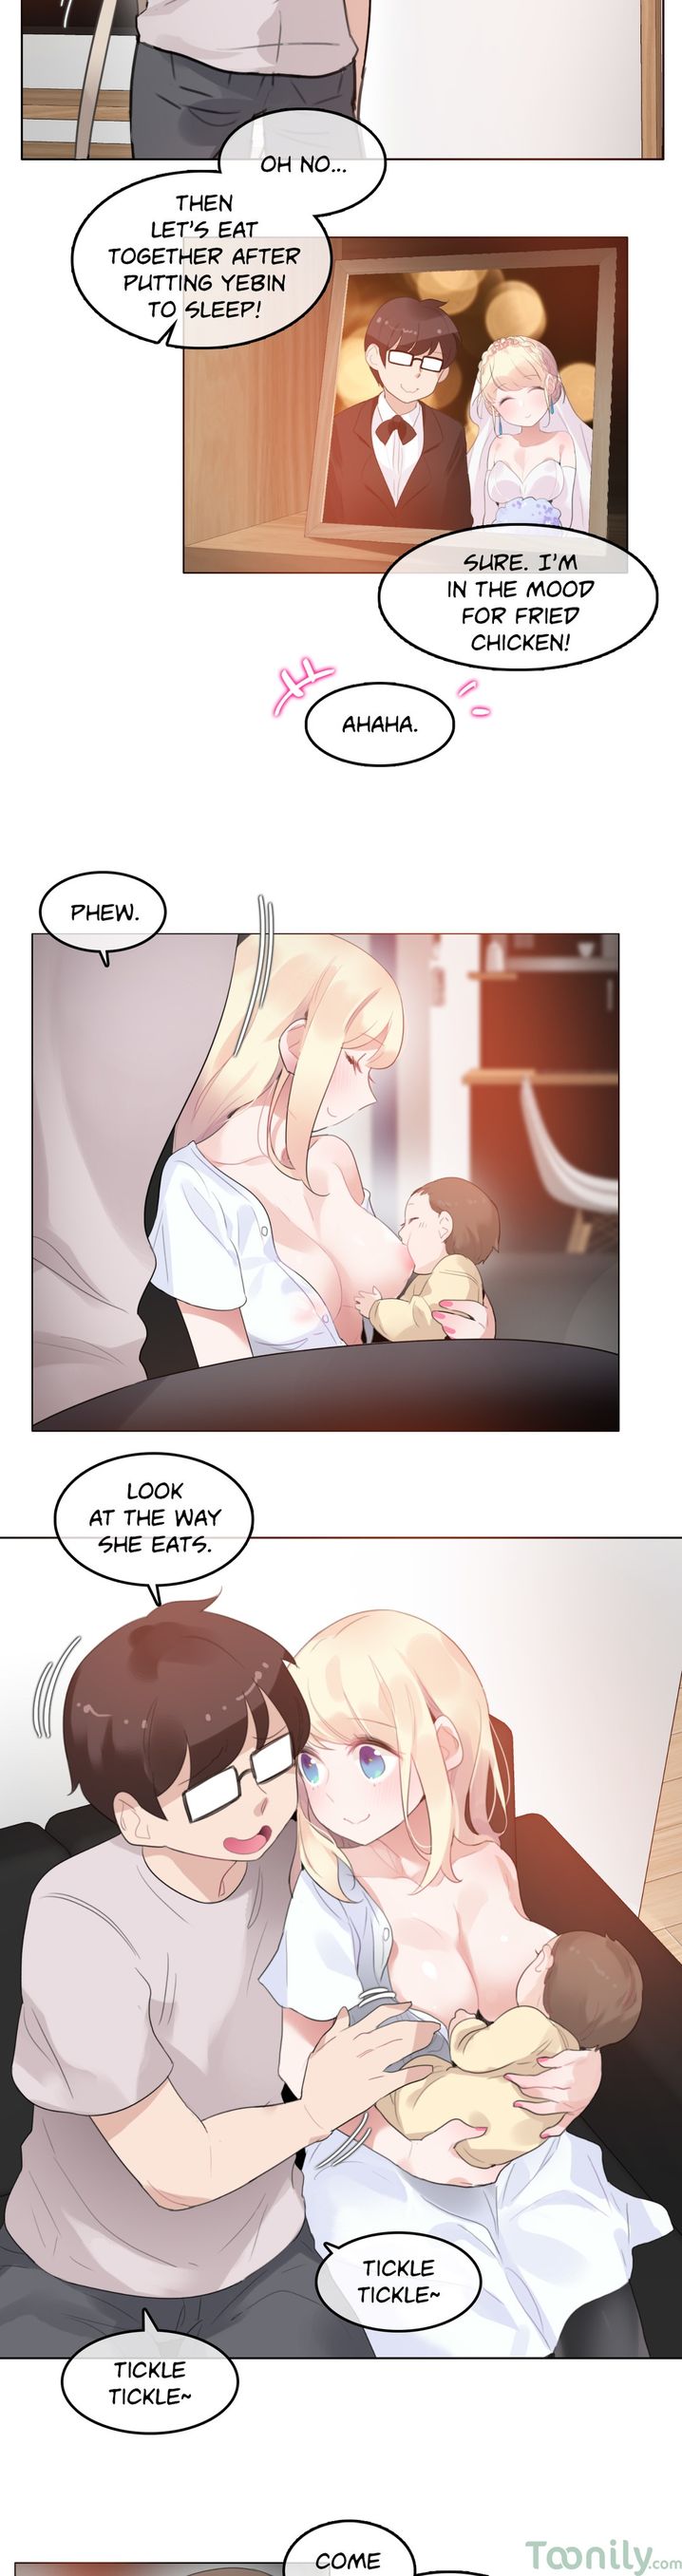 A Pervert’s Daily Life - Chapter 59 Page 3